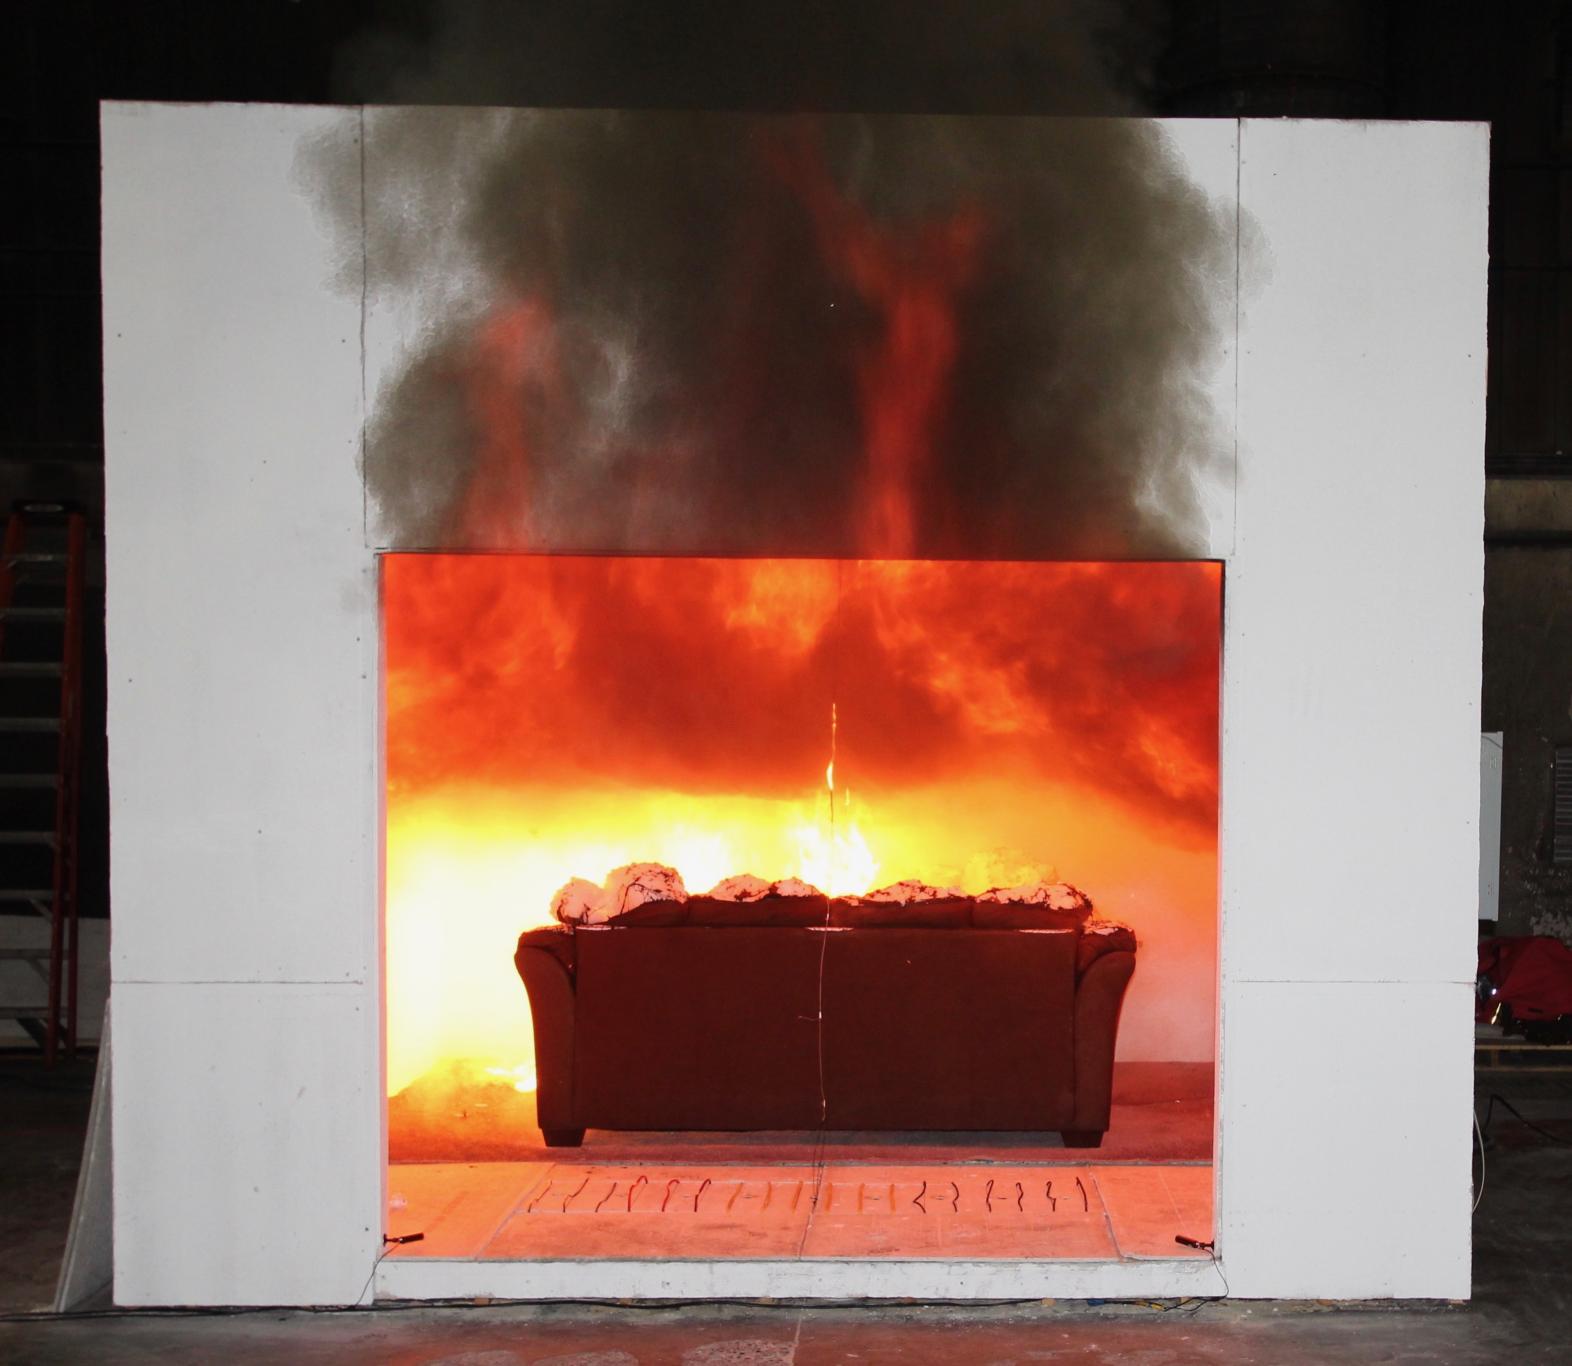 couch on fire within a compartment